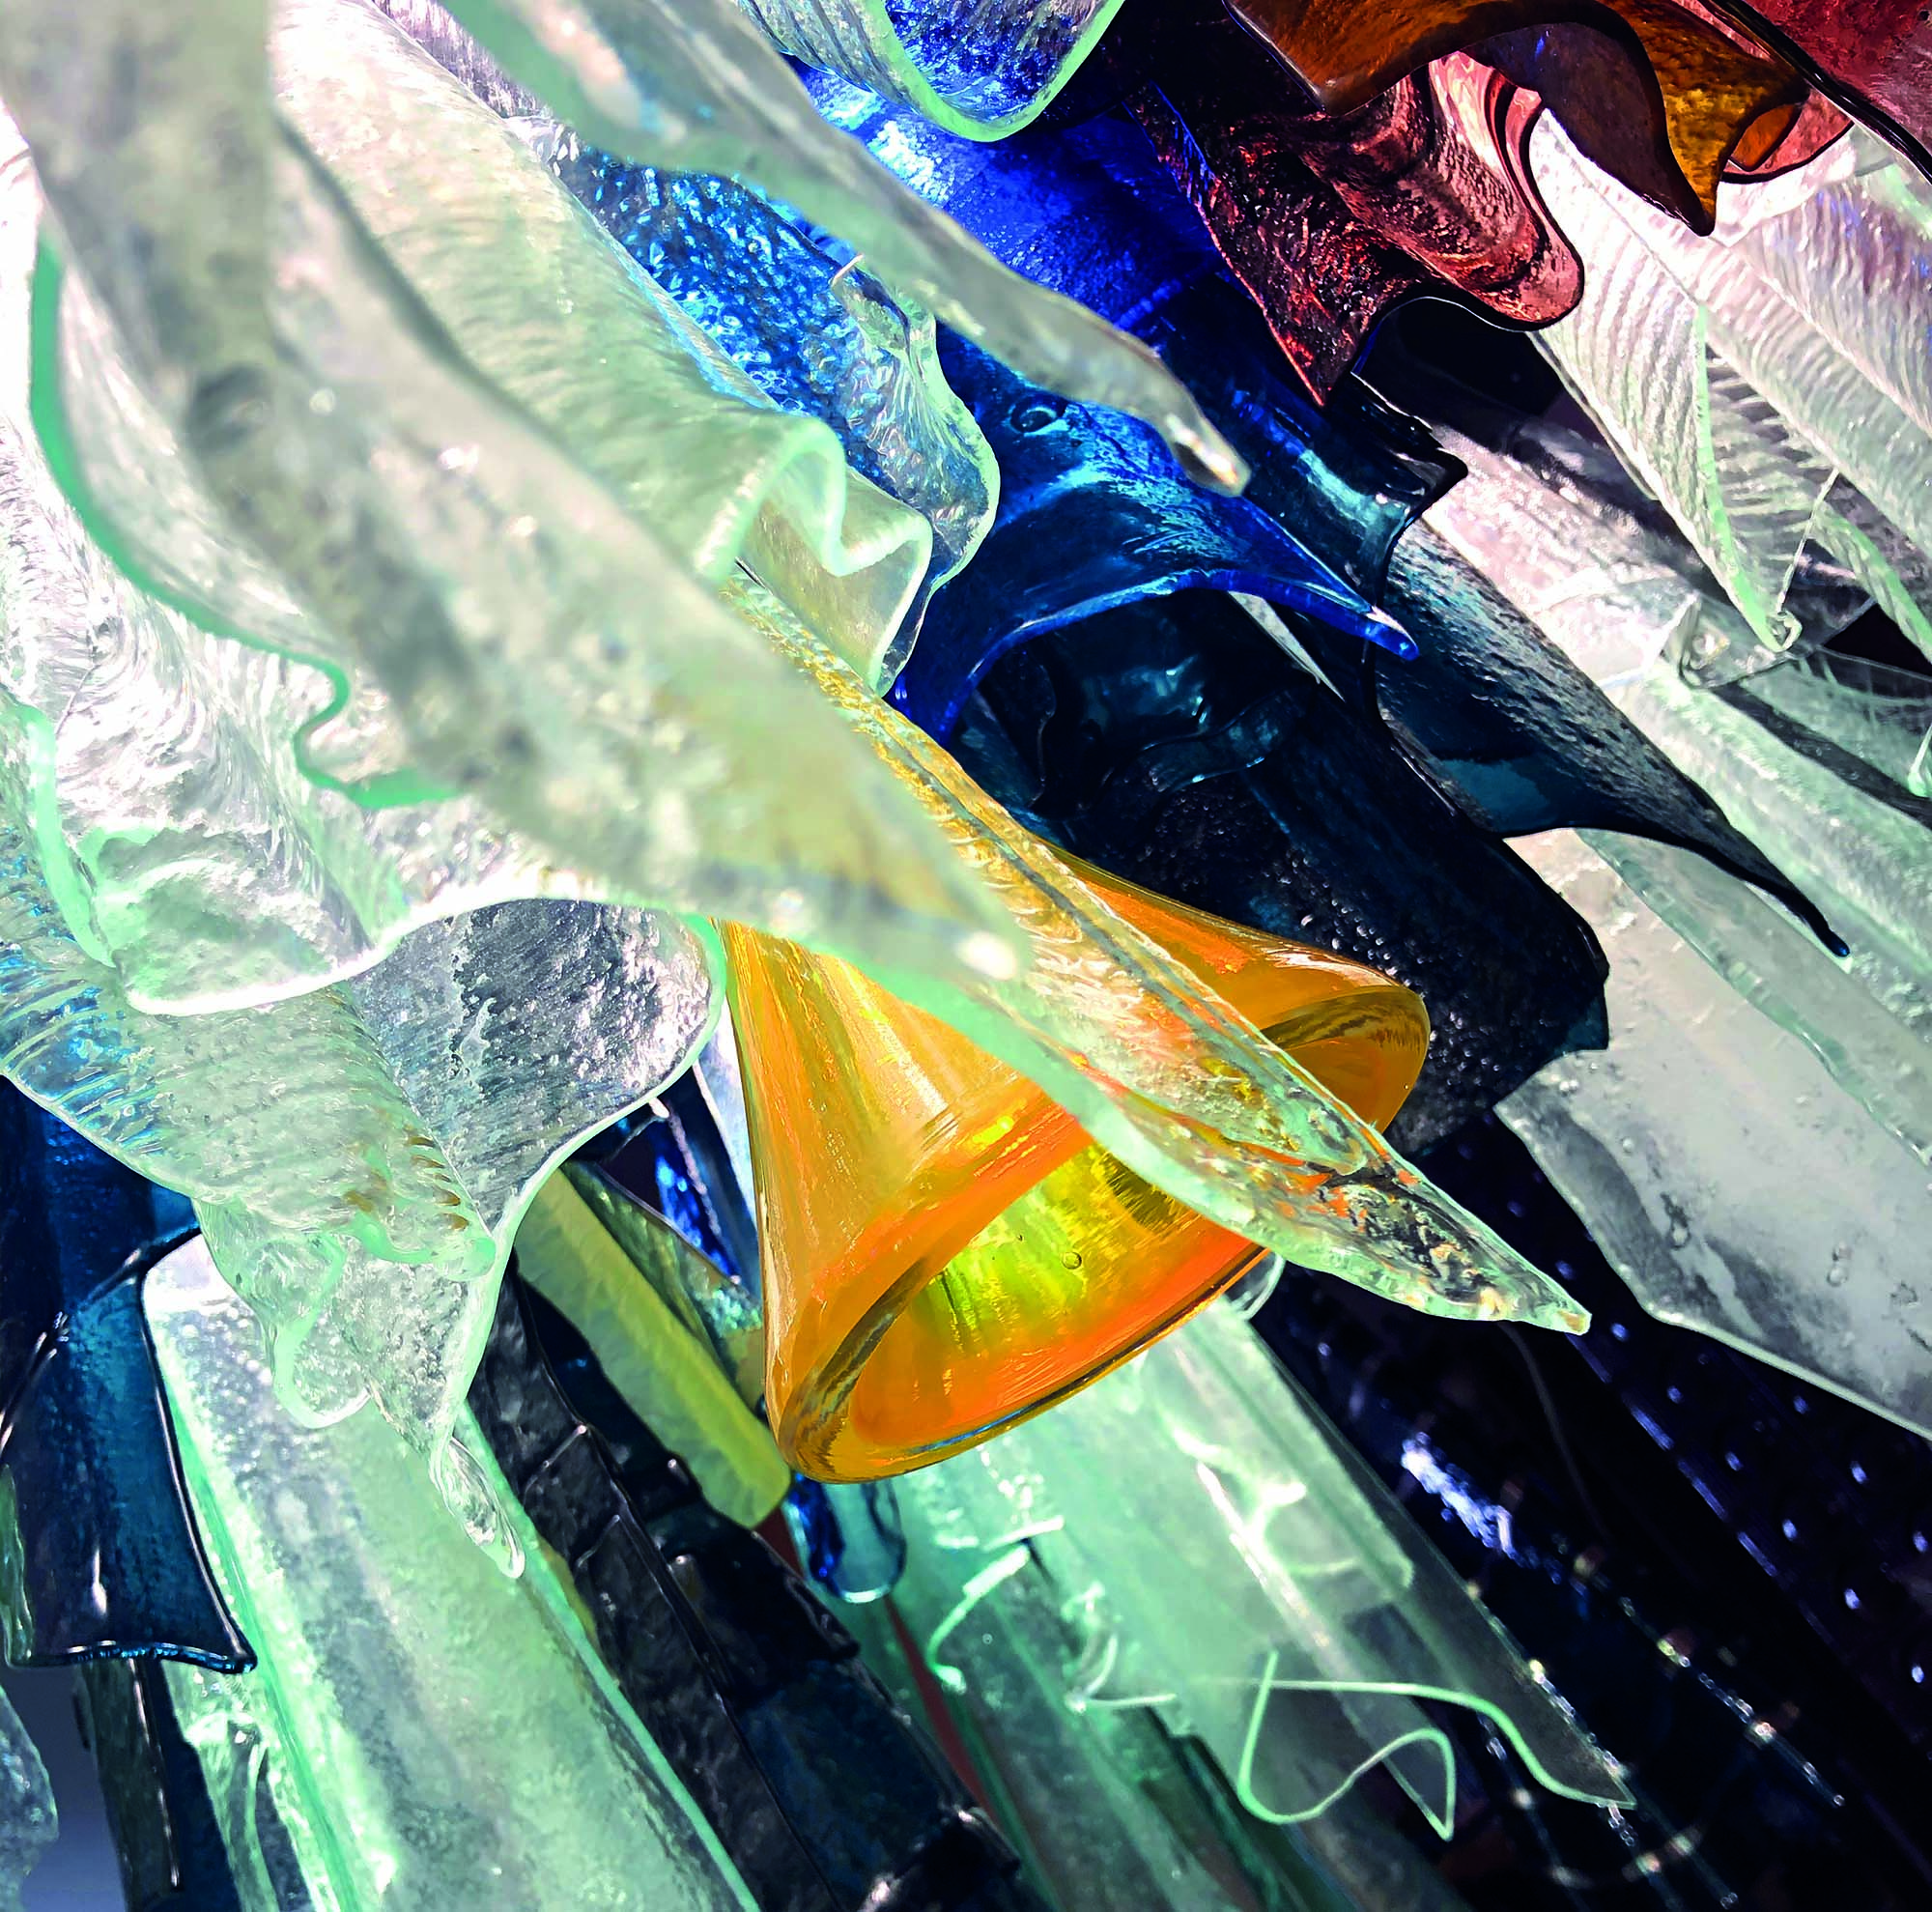 Feierabend – In tribute to our miners, glass sculpture in the round, detail